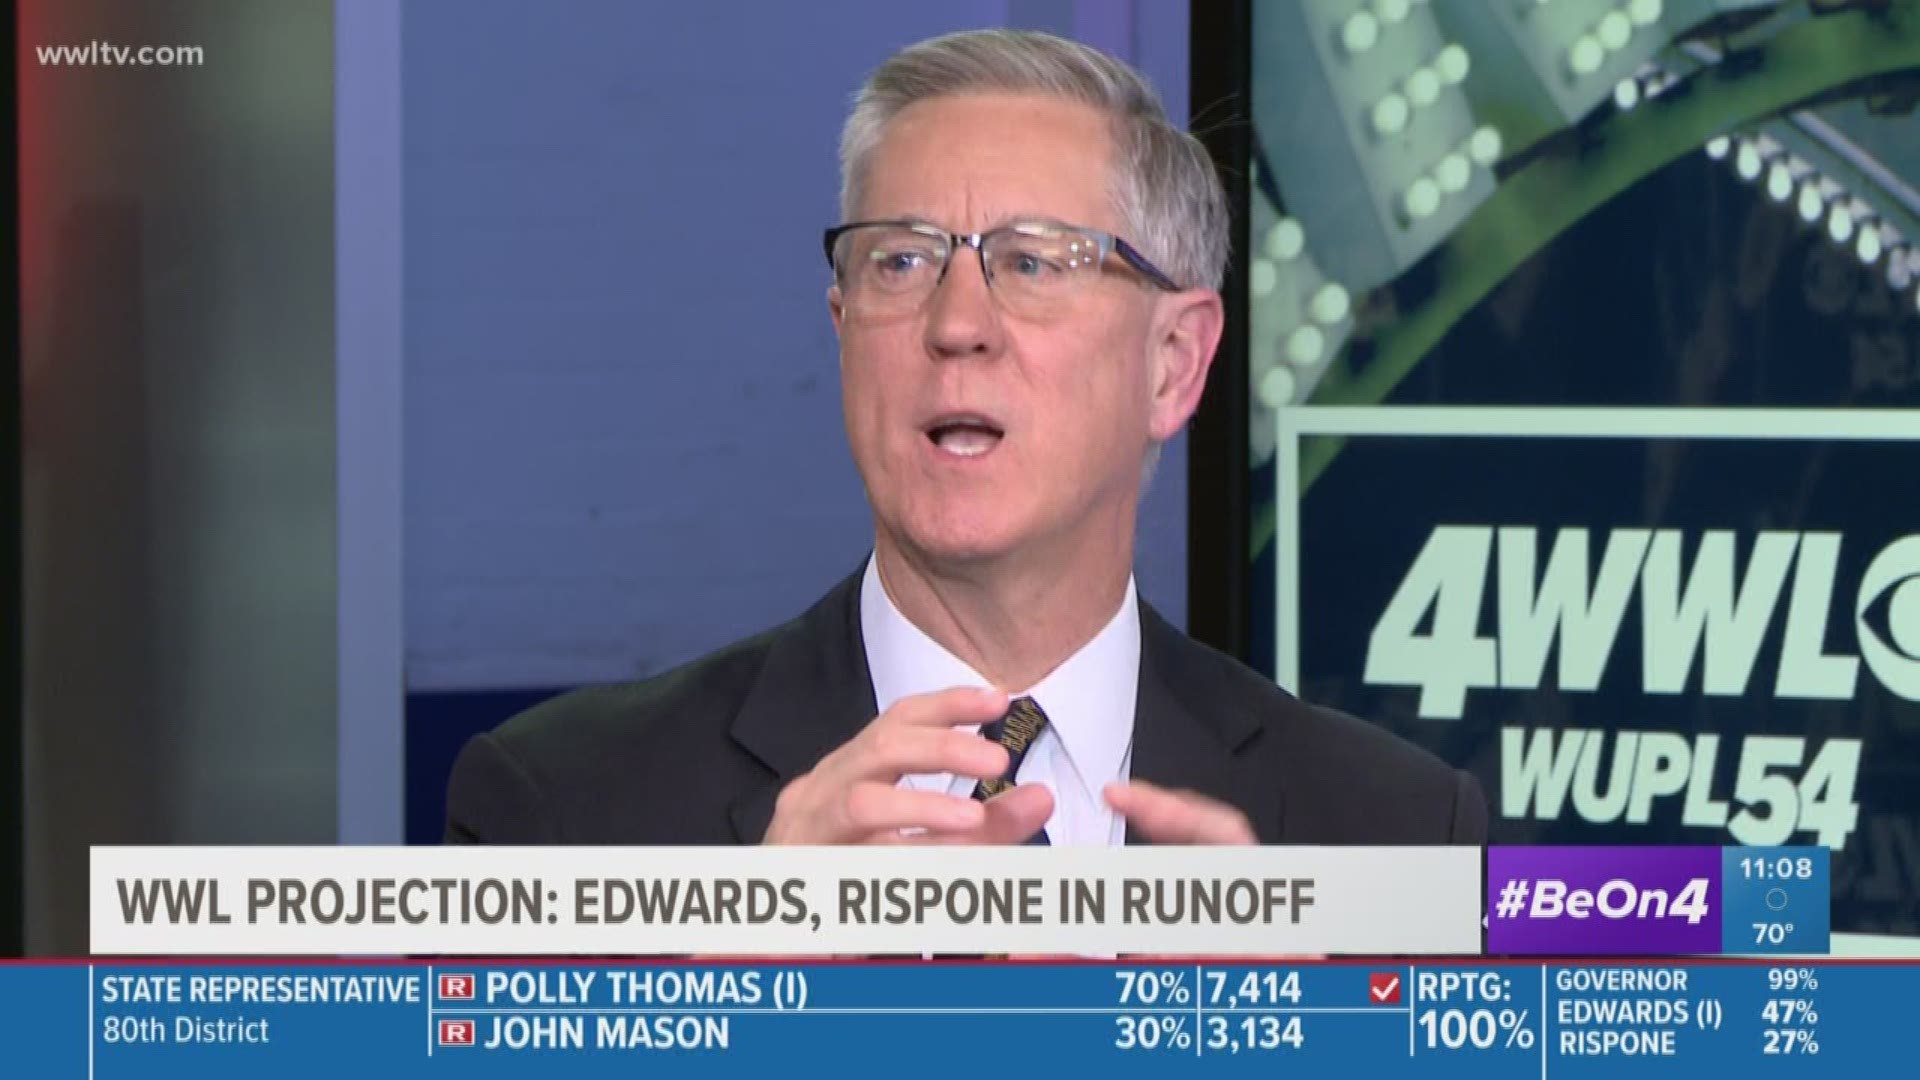 Political analyst Clancy DuBos talks about incumbent John Bel Edwards' chances of being re-elected in an expected tough runoff with Eddie Rispone.